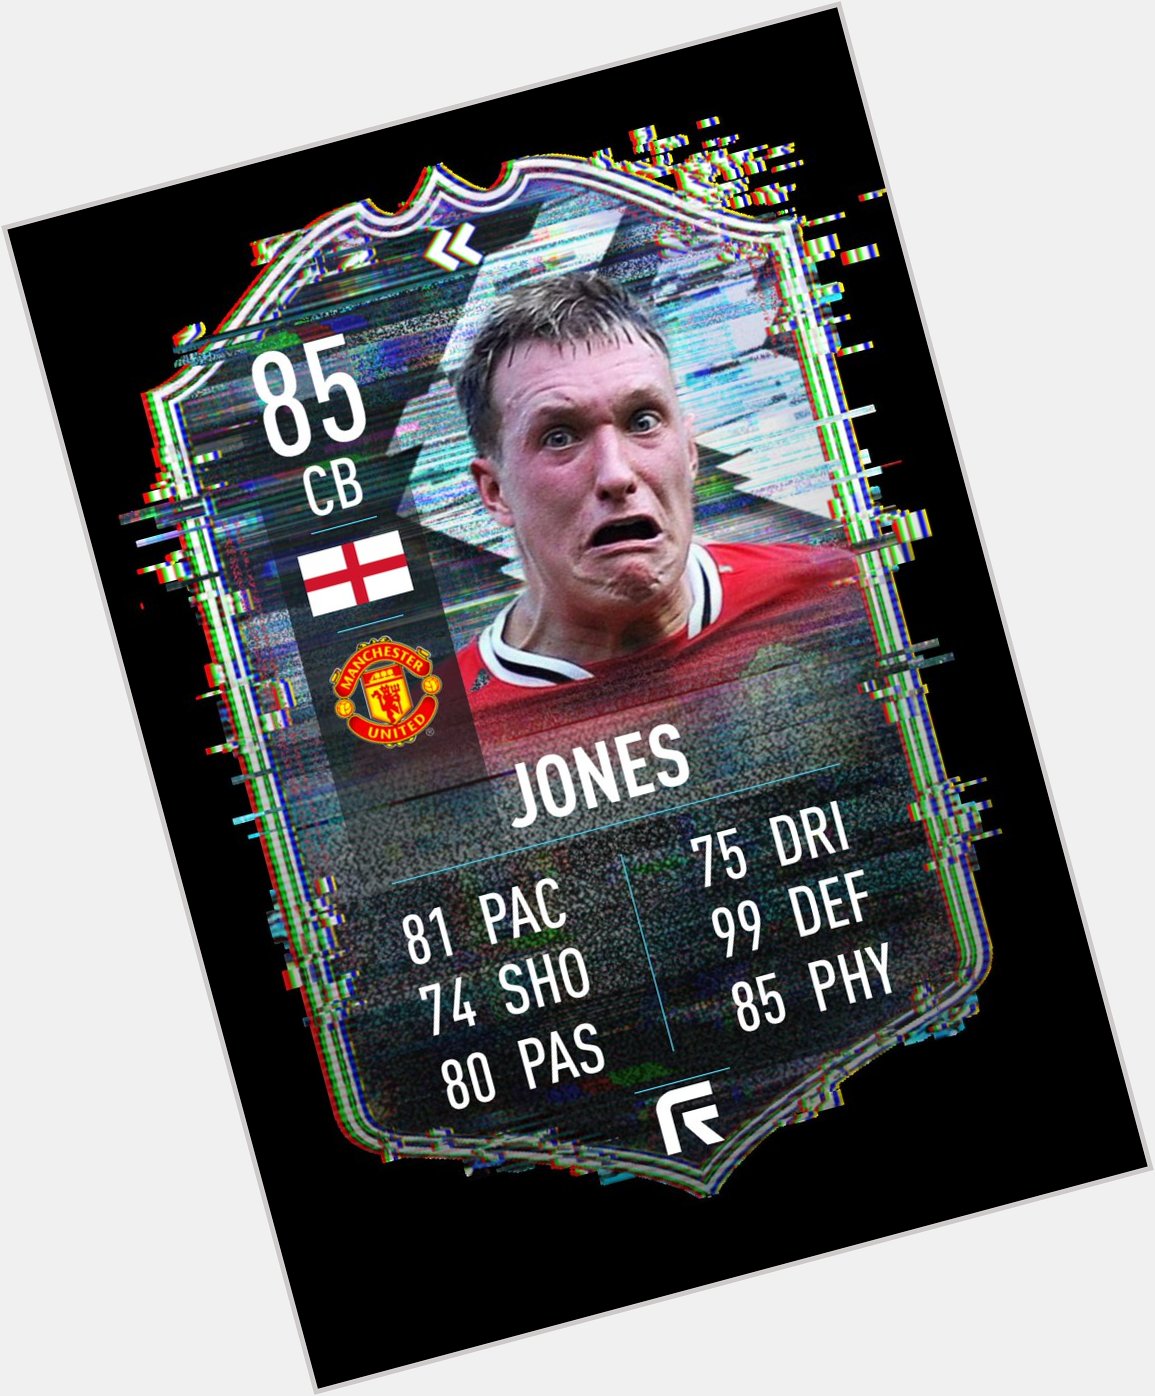 Happy birthday big Phil Jones!
Time for the flashback we all want  